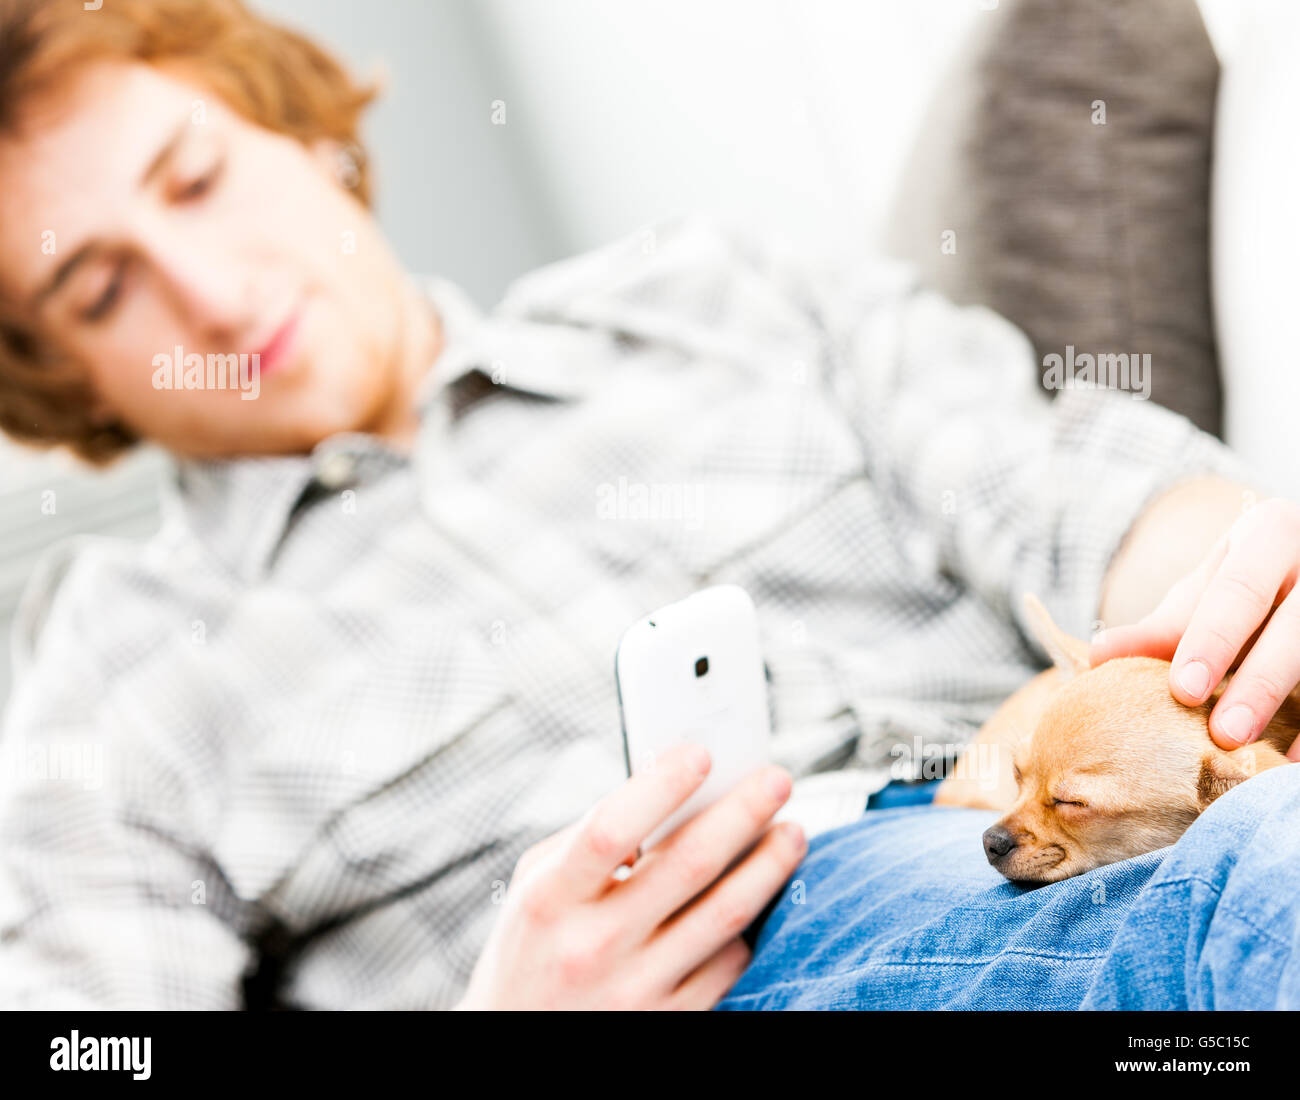 Young man caressing his pet chihuahua dog as it sleeps on his lap while they relax together on a couch Stock Photo